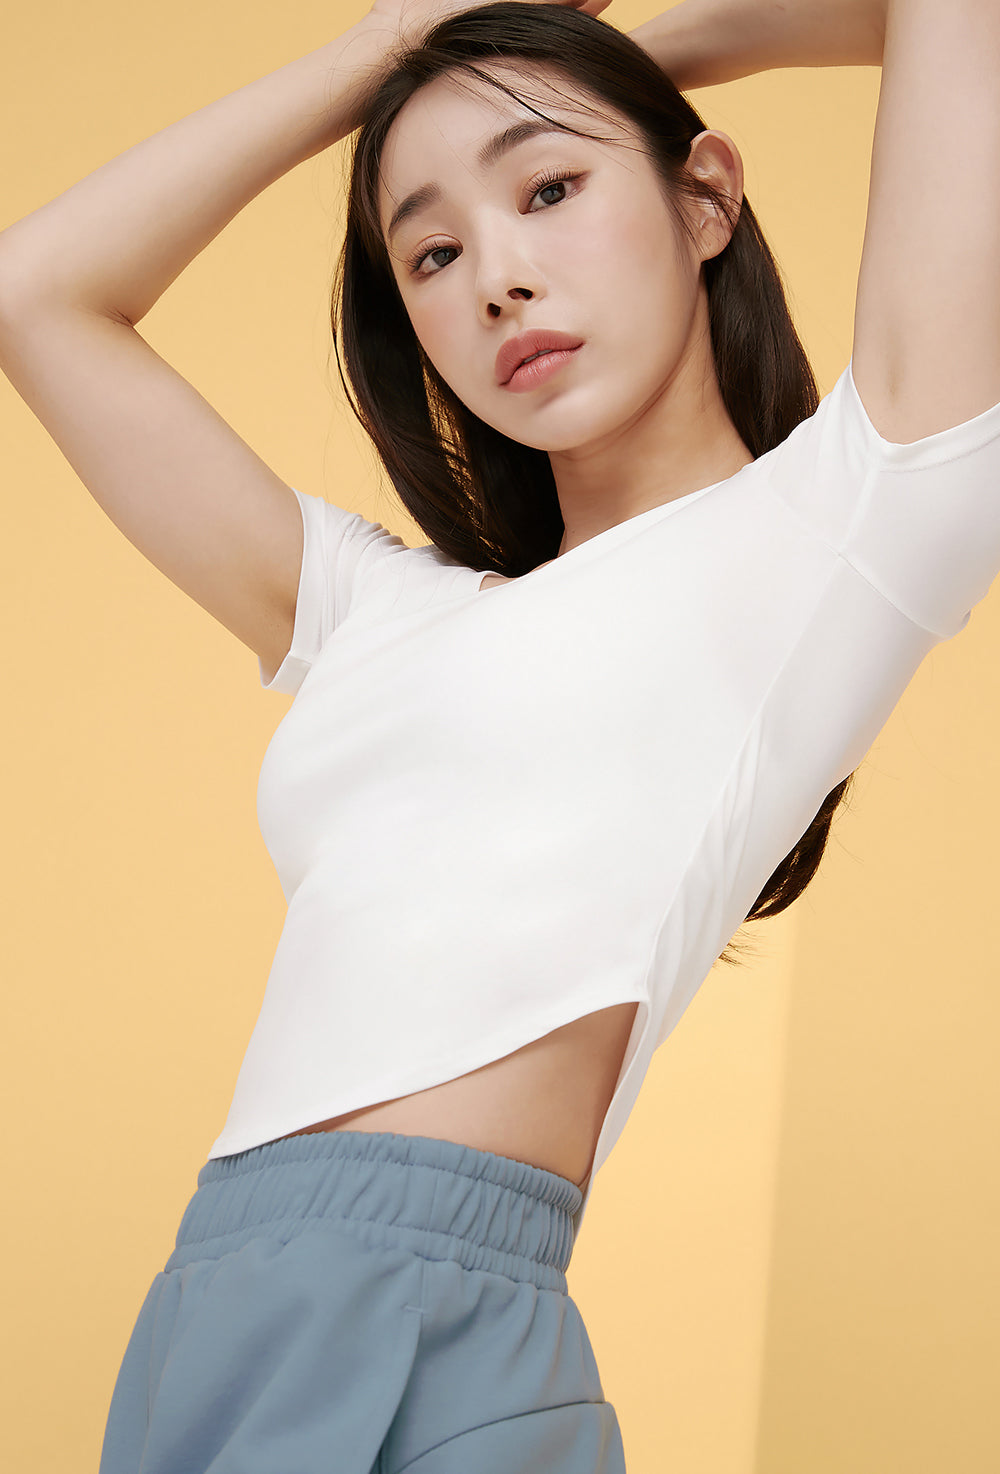 XELLA Light Round Crop Top - Ivory (Clearance)